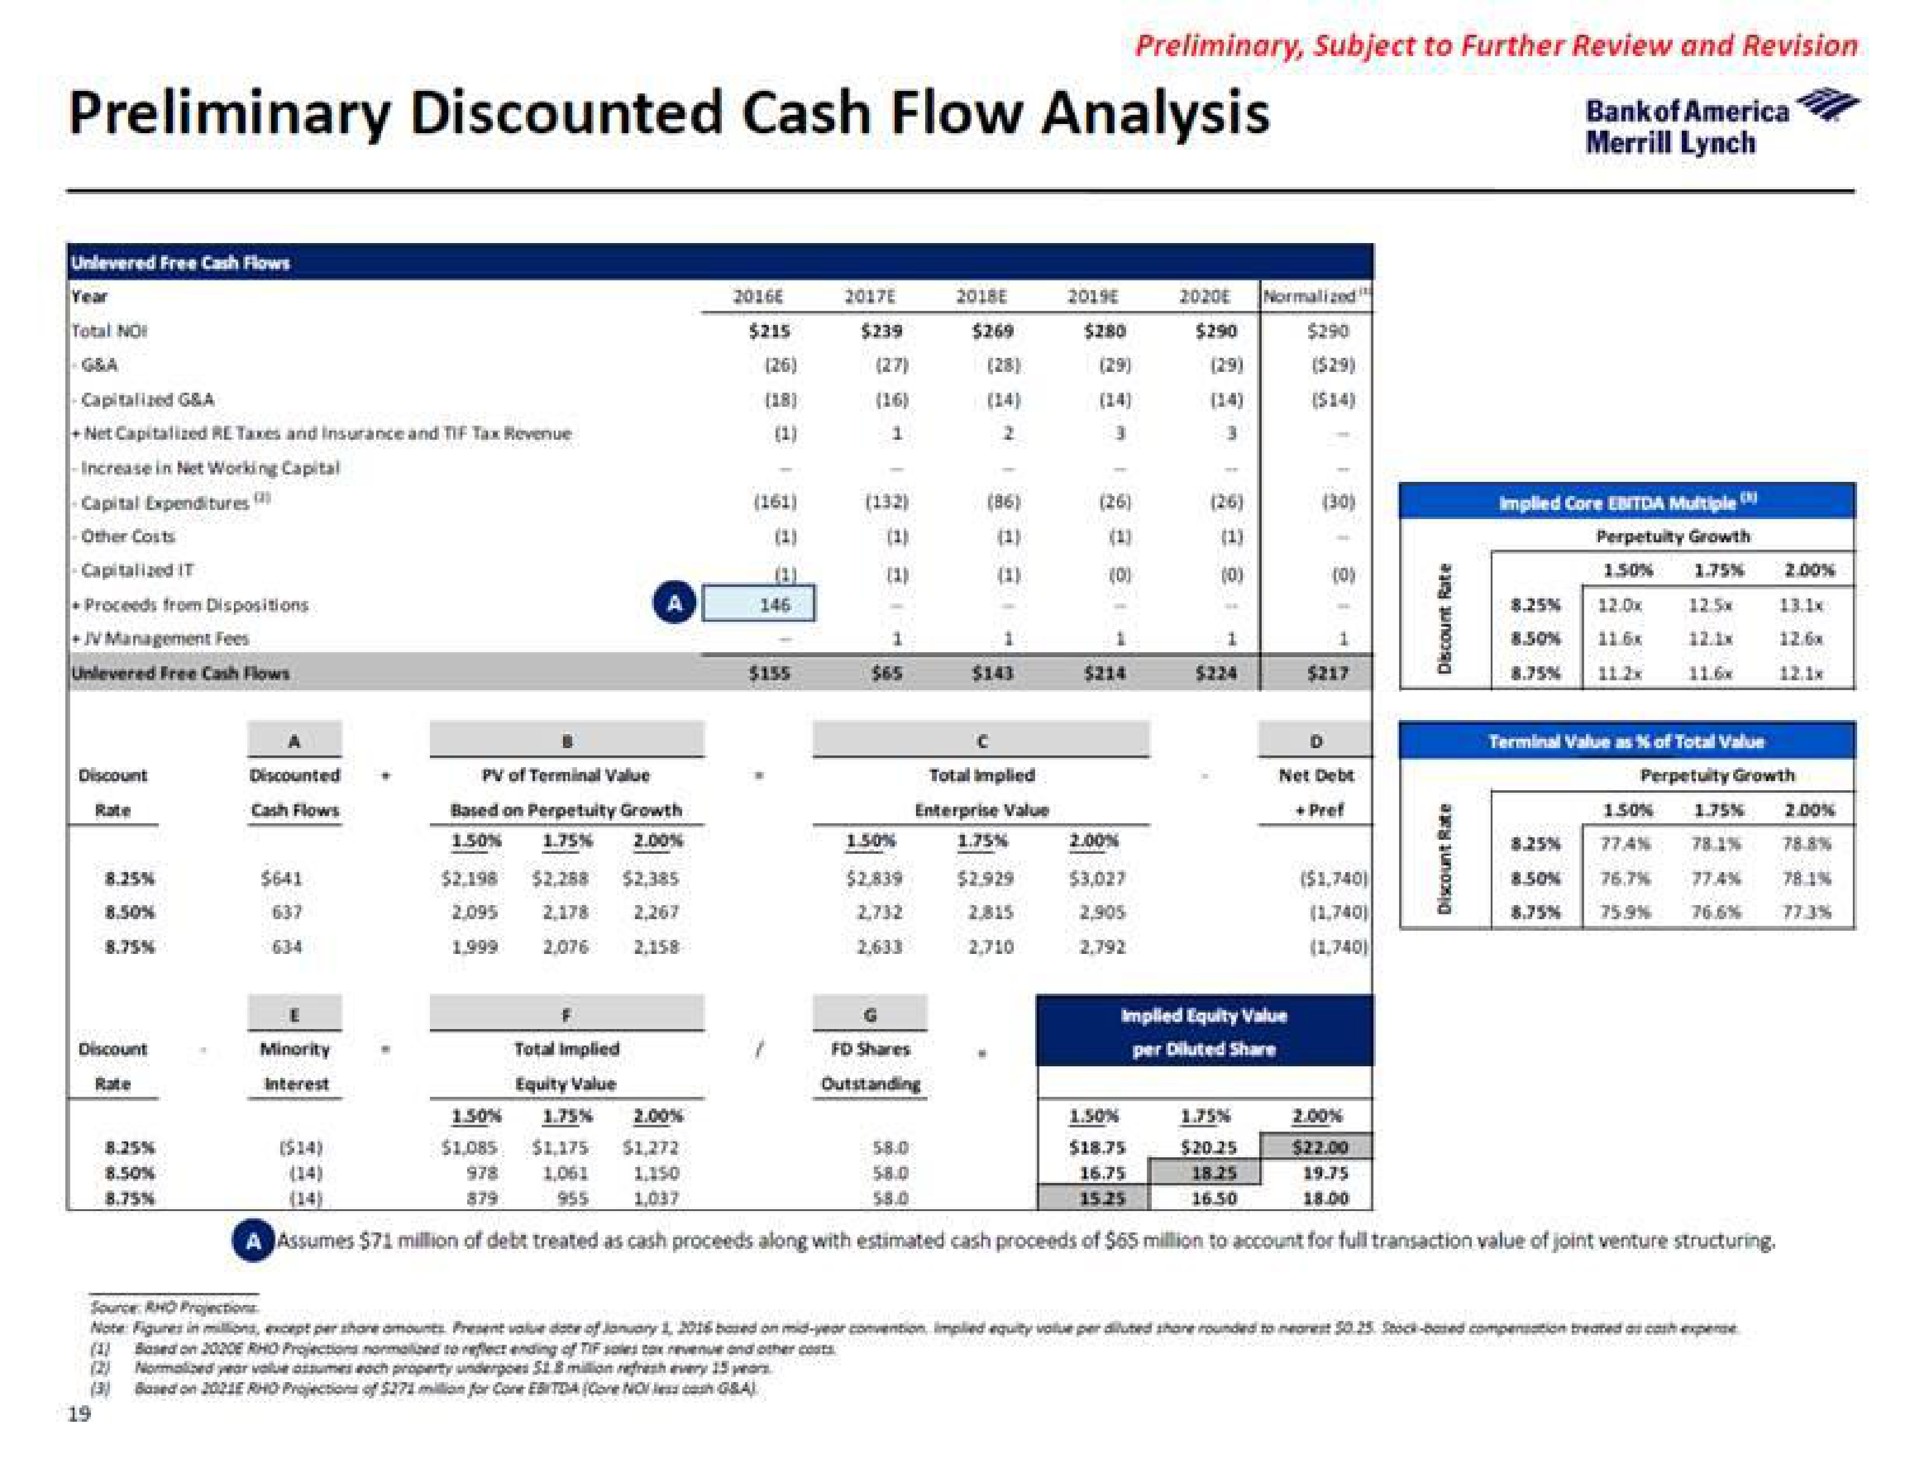 preliminary discounted cash flow analysis lynch | Bank of America